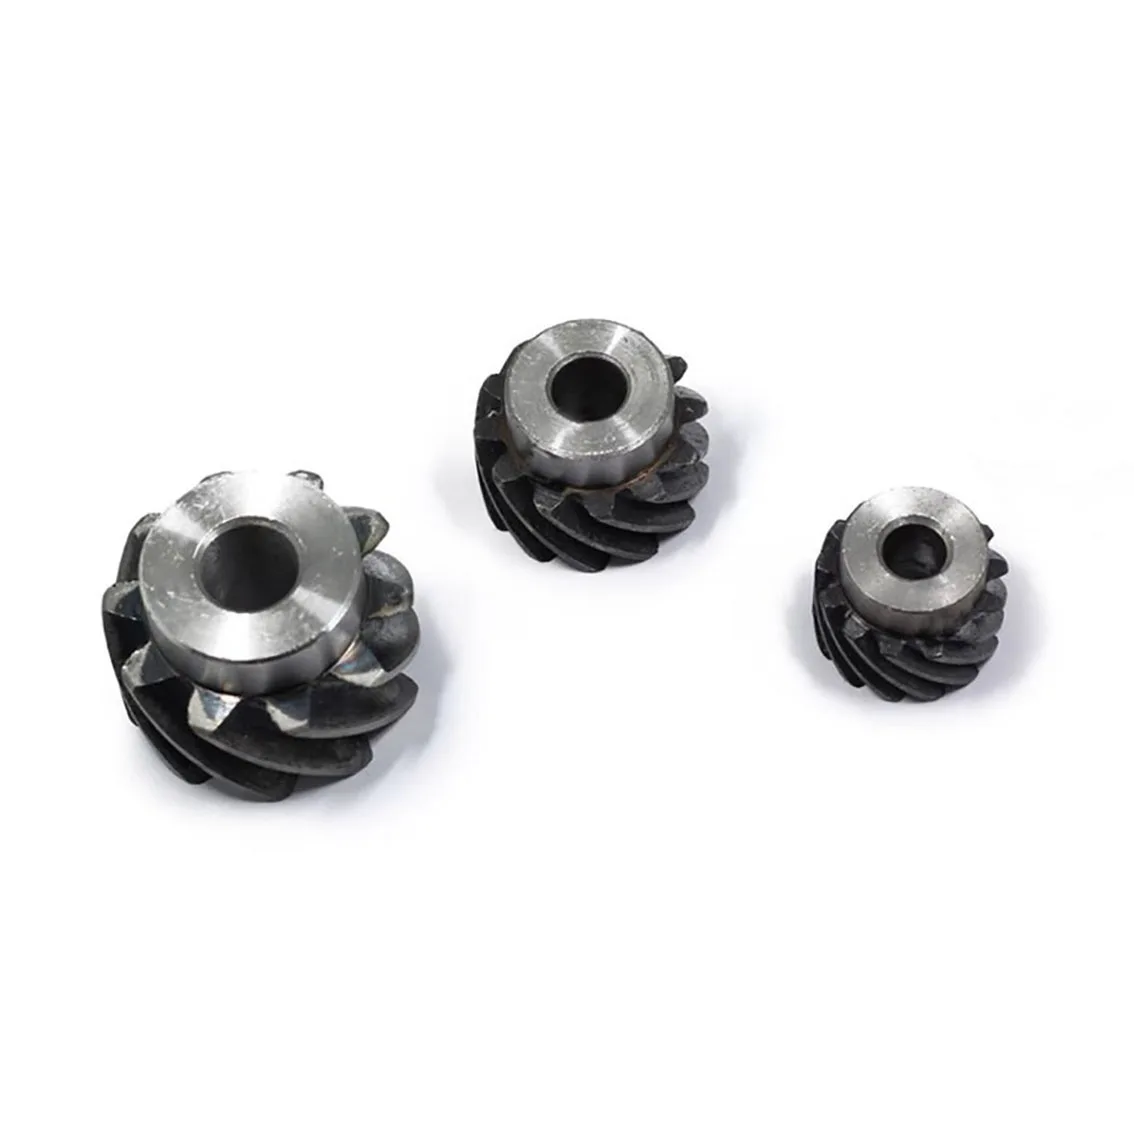 

1pcs 2.5M 45 Degree Left Helical Gear Staggered Gear Process 10-30 Teeth Hole 14mm 15mm 20mm Machinery Transmission Parts